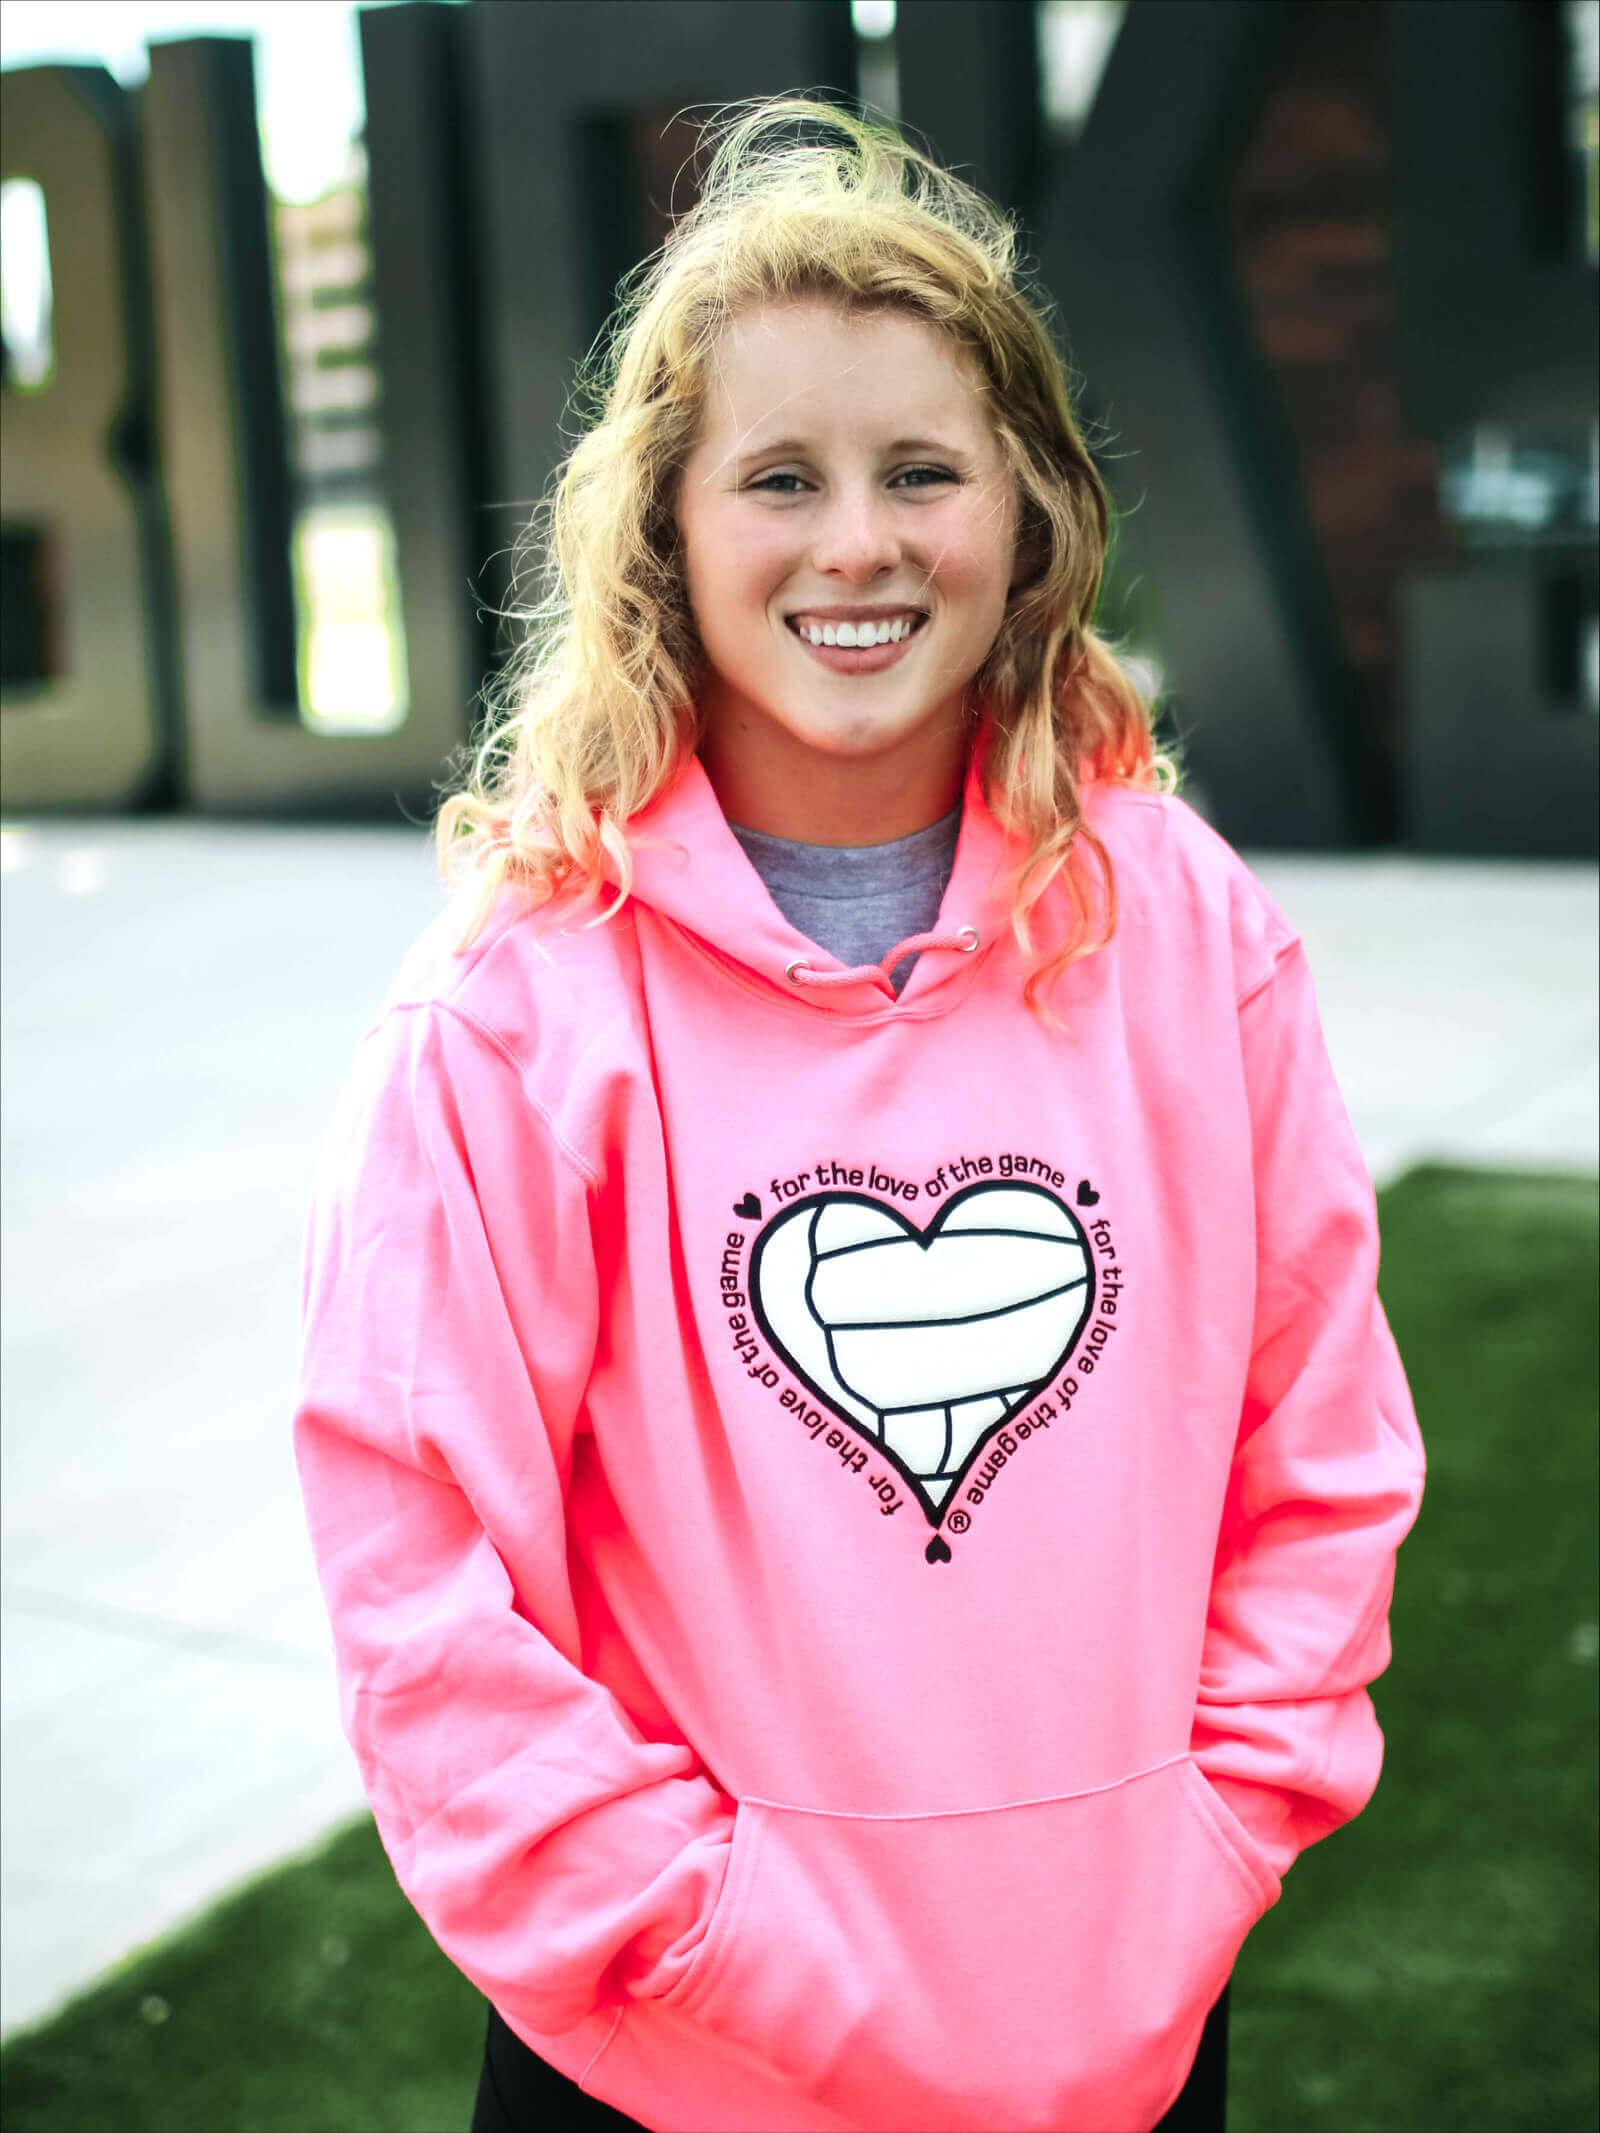 For the Love of the Game with Volleyball detail on Neon Pink hoodie